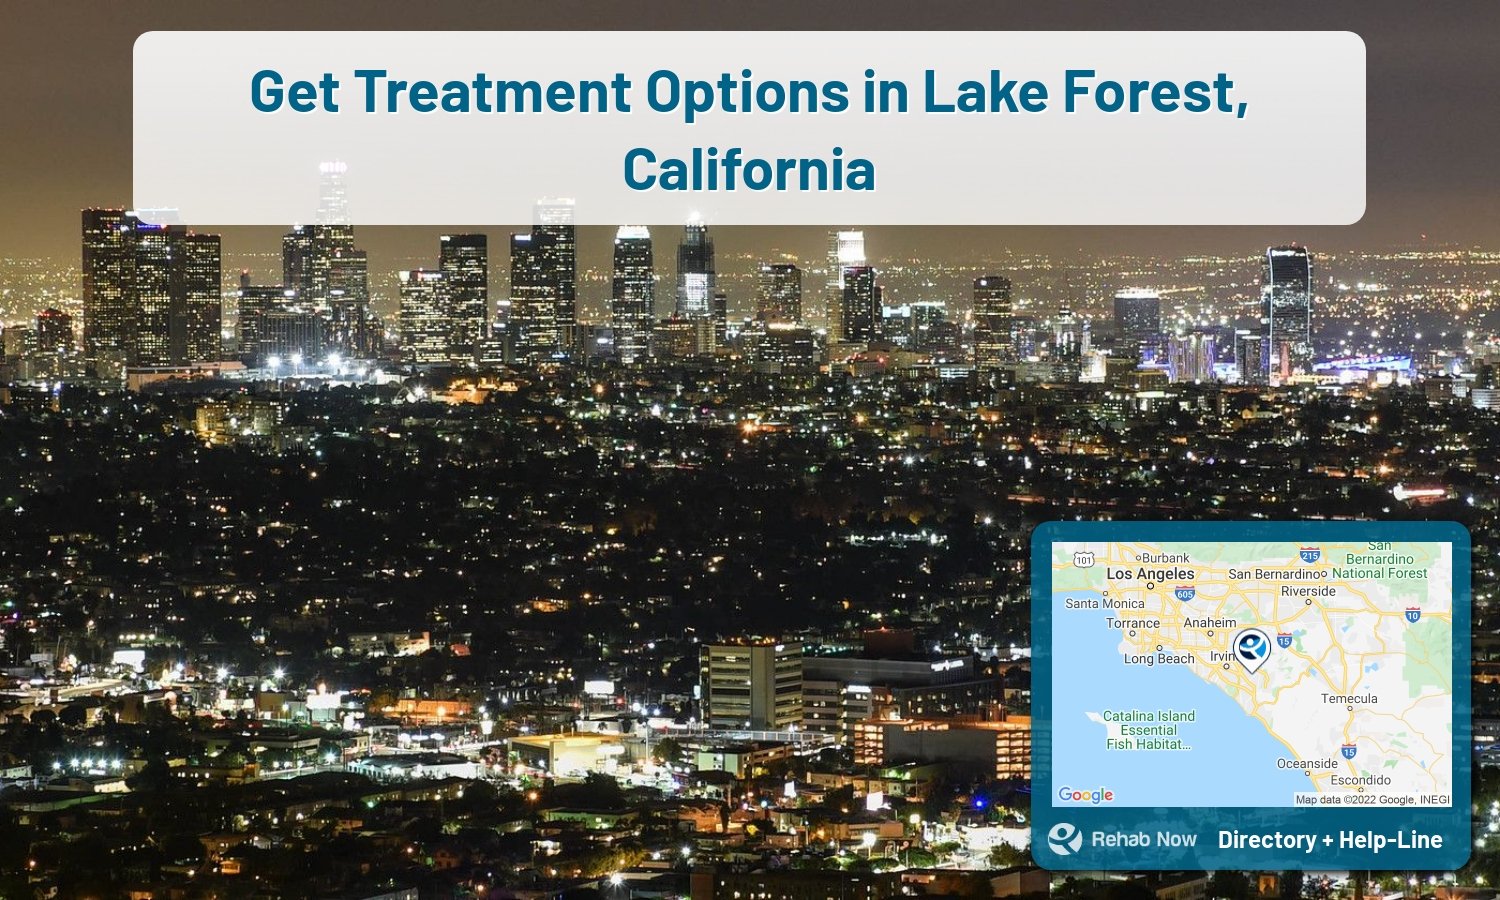 Our experts can help you find treatment now in Lake Forest, California. We list drug rehab and alcohol centers in California.